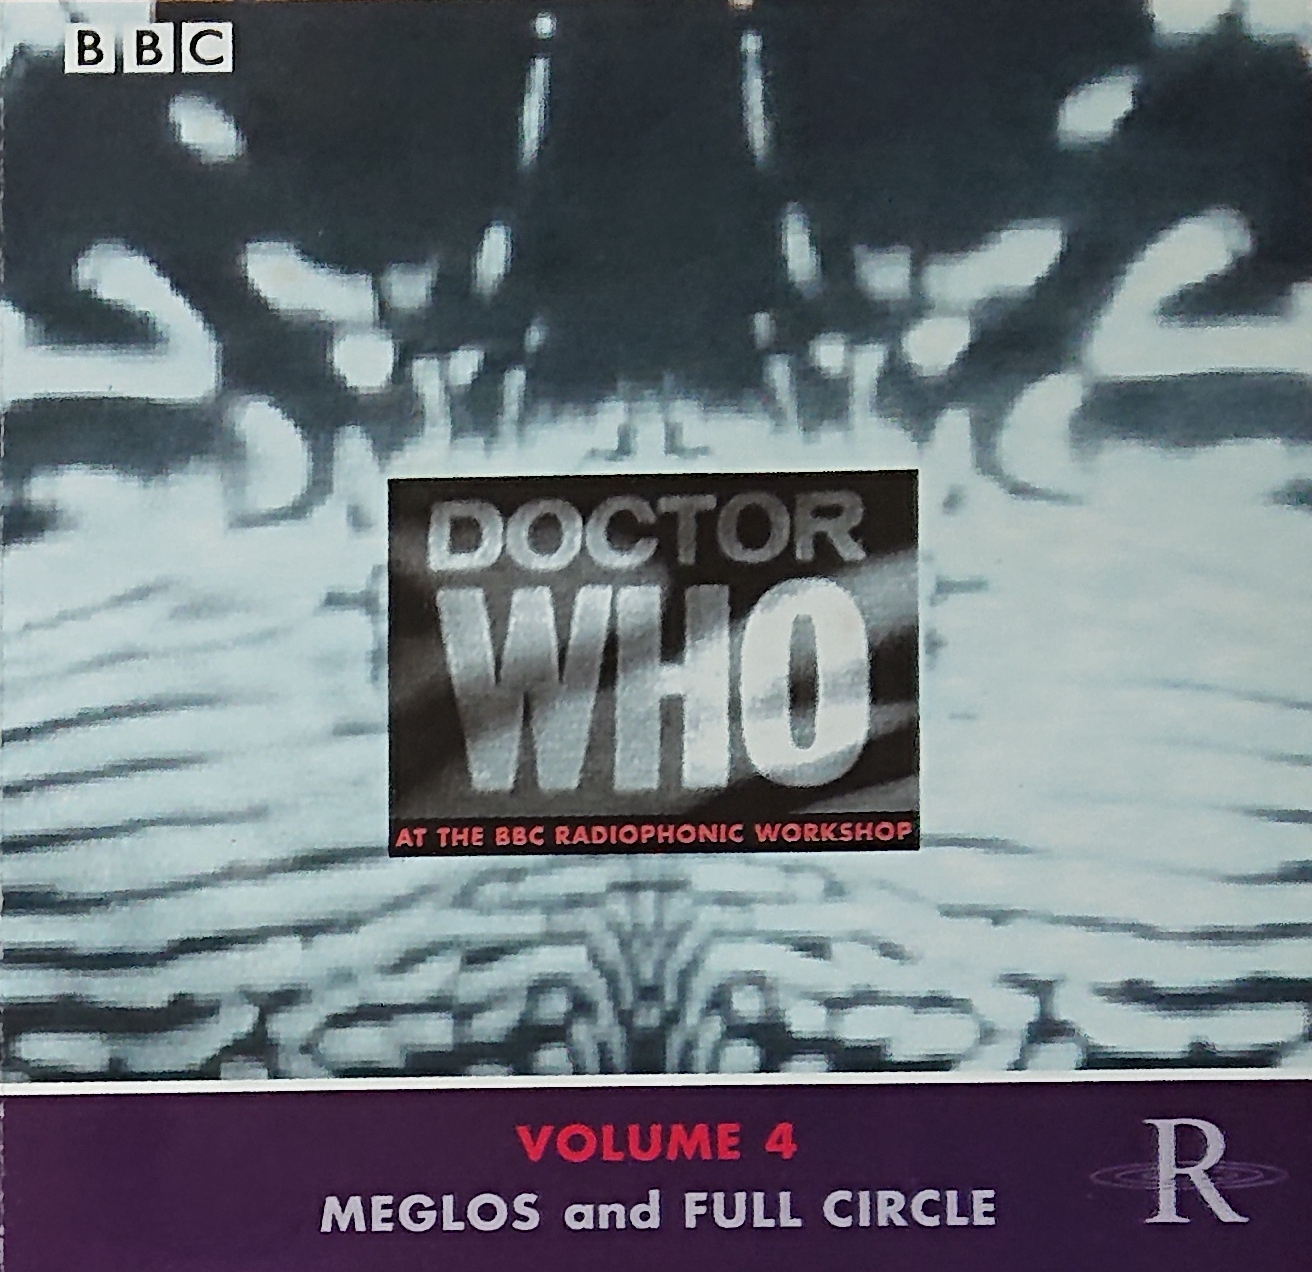 Picture of WMSF 6053-2 Doctor Who - At the radiophonic workshop - Volume 4 by artist Various from the BBC records and Tapes library